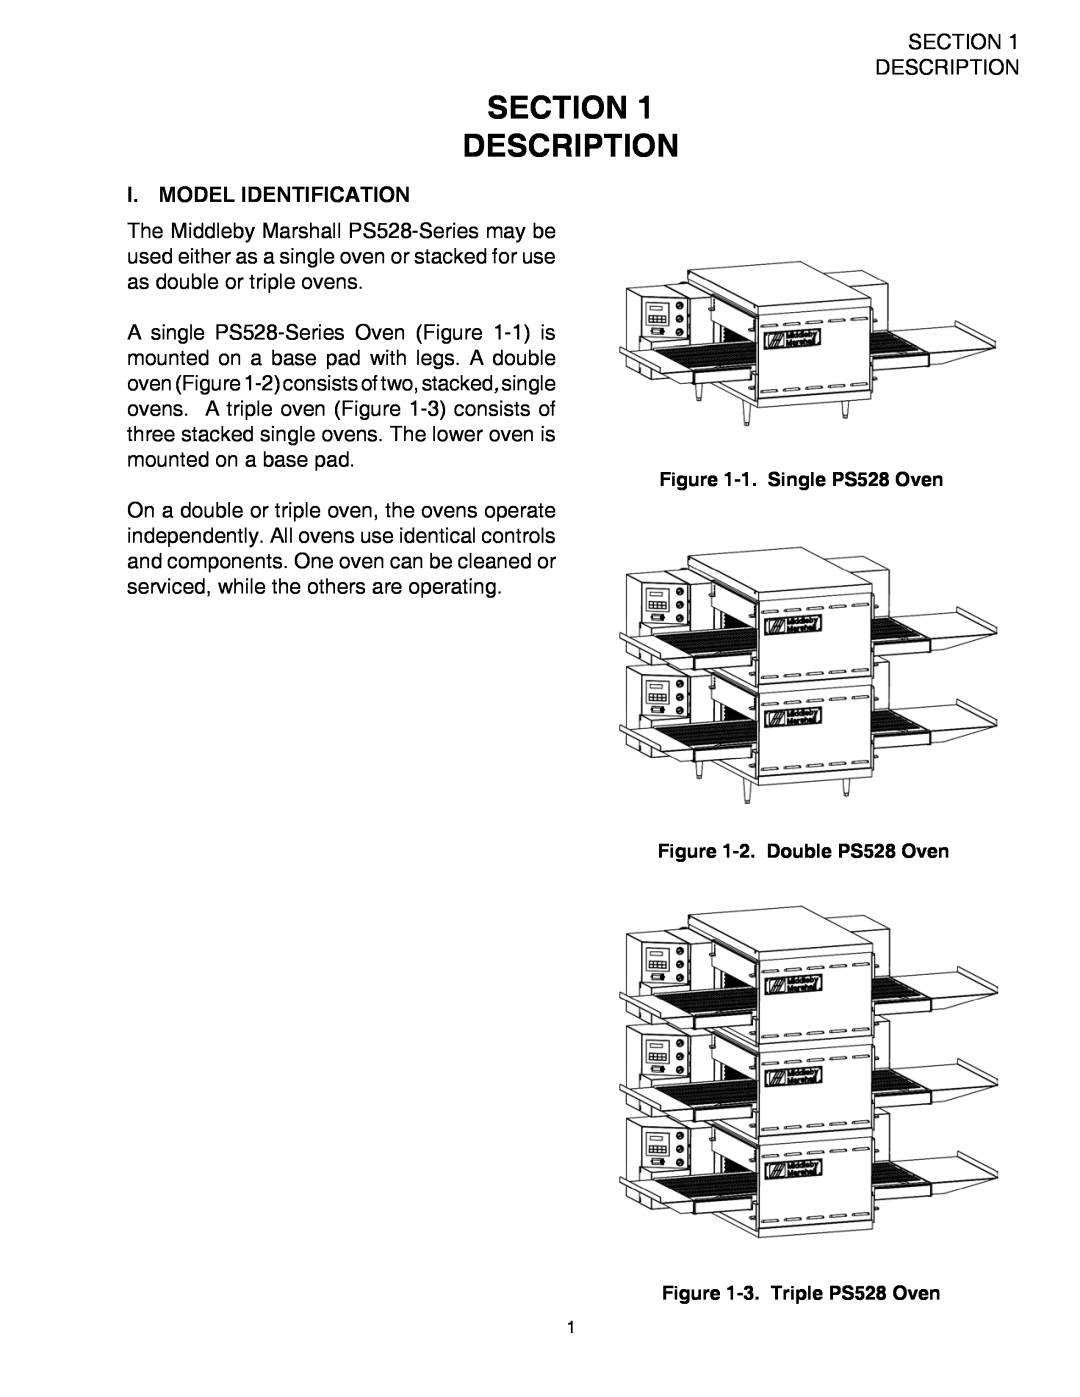 Middleby Marshall PS528 (Triple), PS528E, PS528 (Double) installation manual Section Description, I. Model Identification 